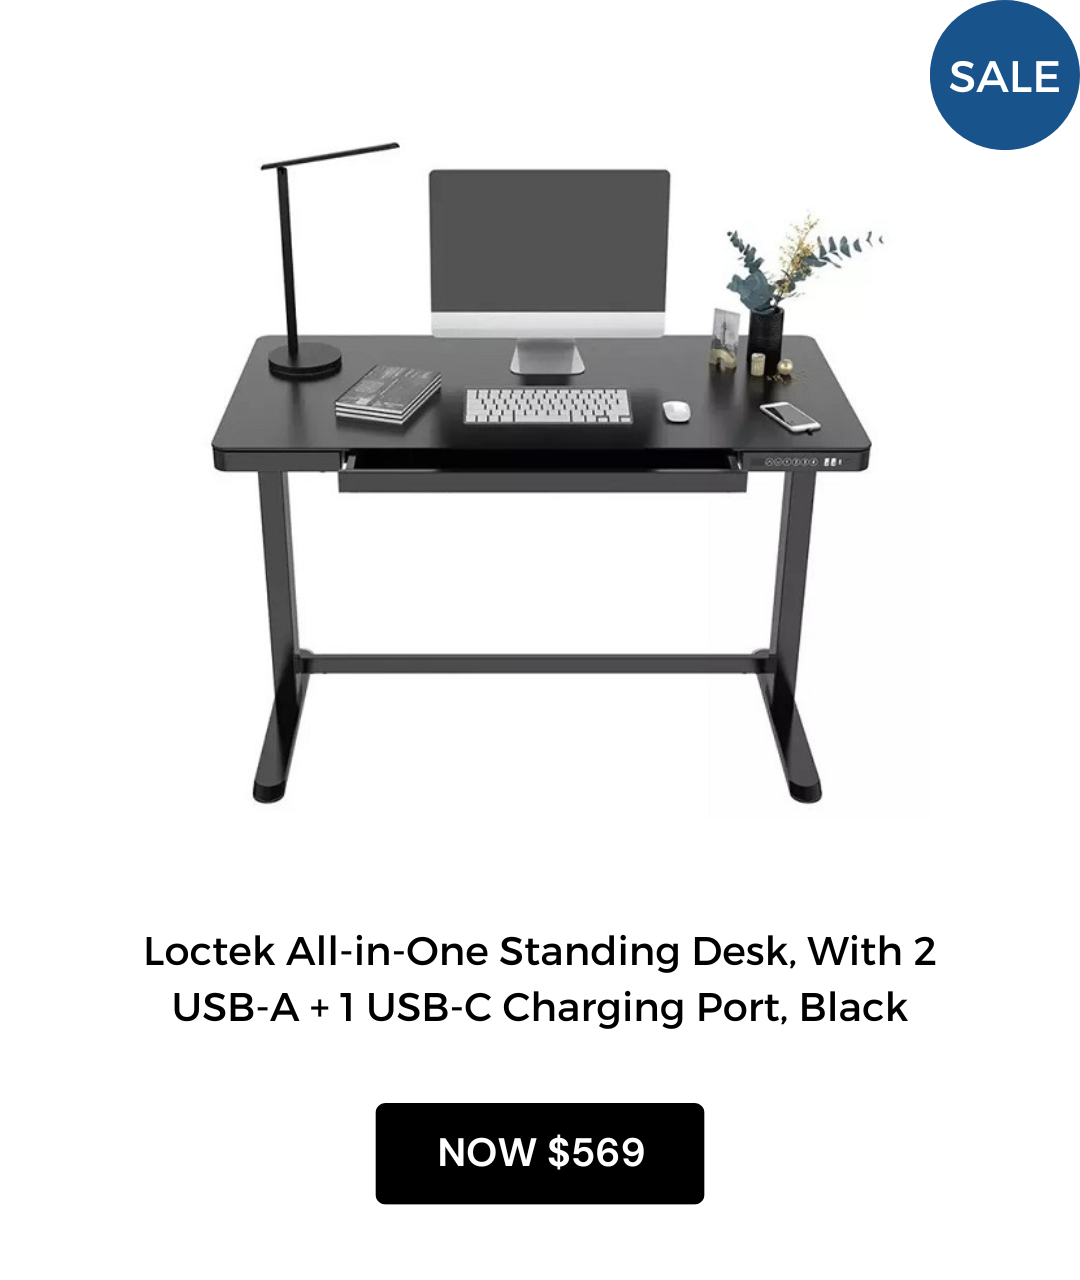 Loctek All-in-One Standing Desk, With 2 USB-A + 1 USB-C Charging Port, Pull-out Drawer, 1200*600mm, Black